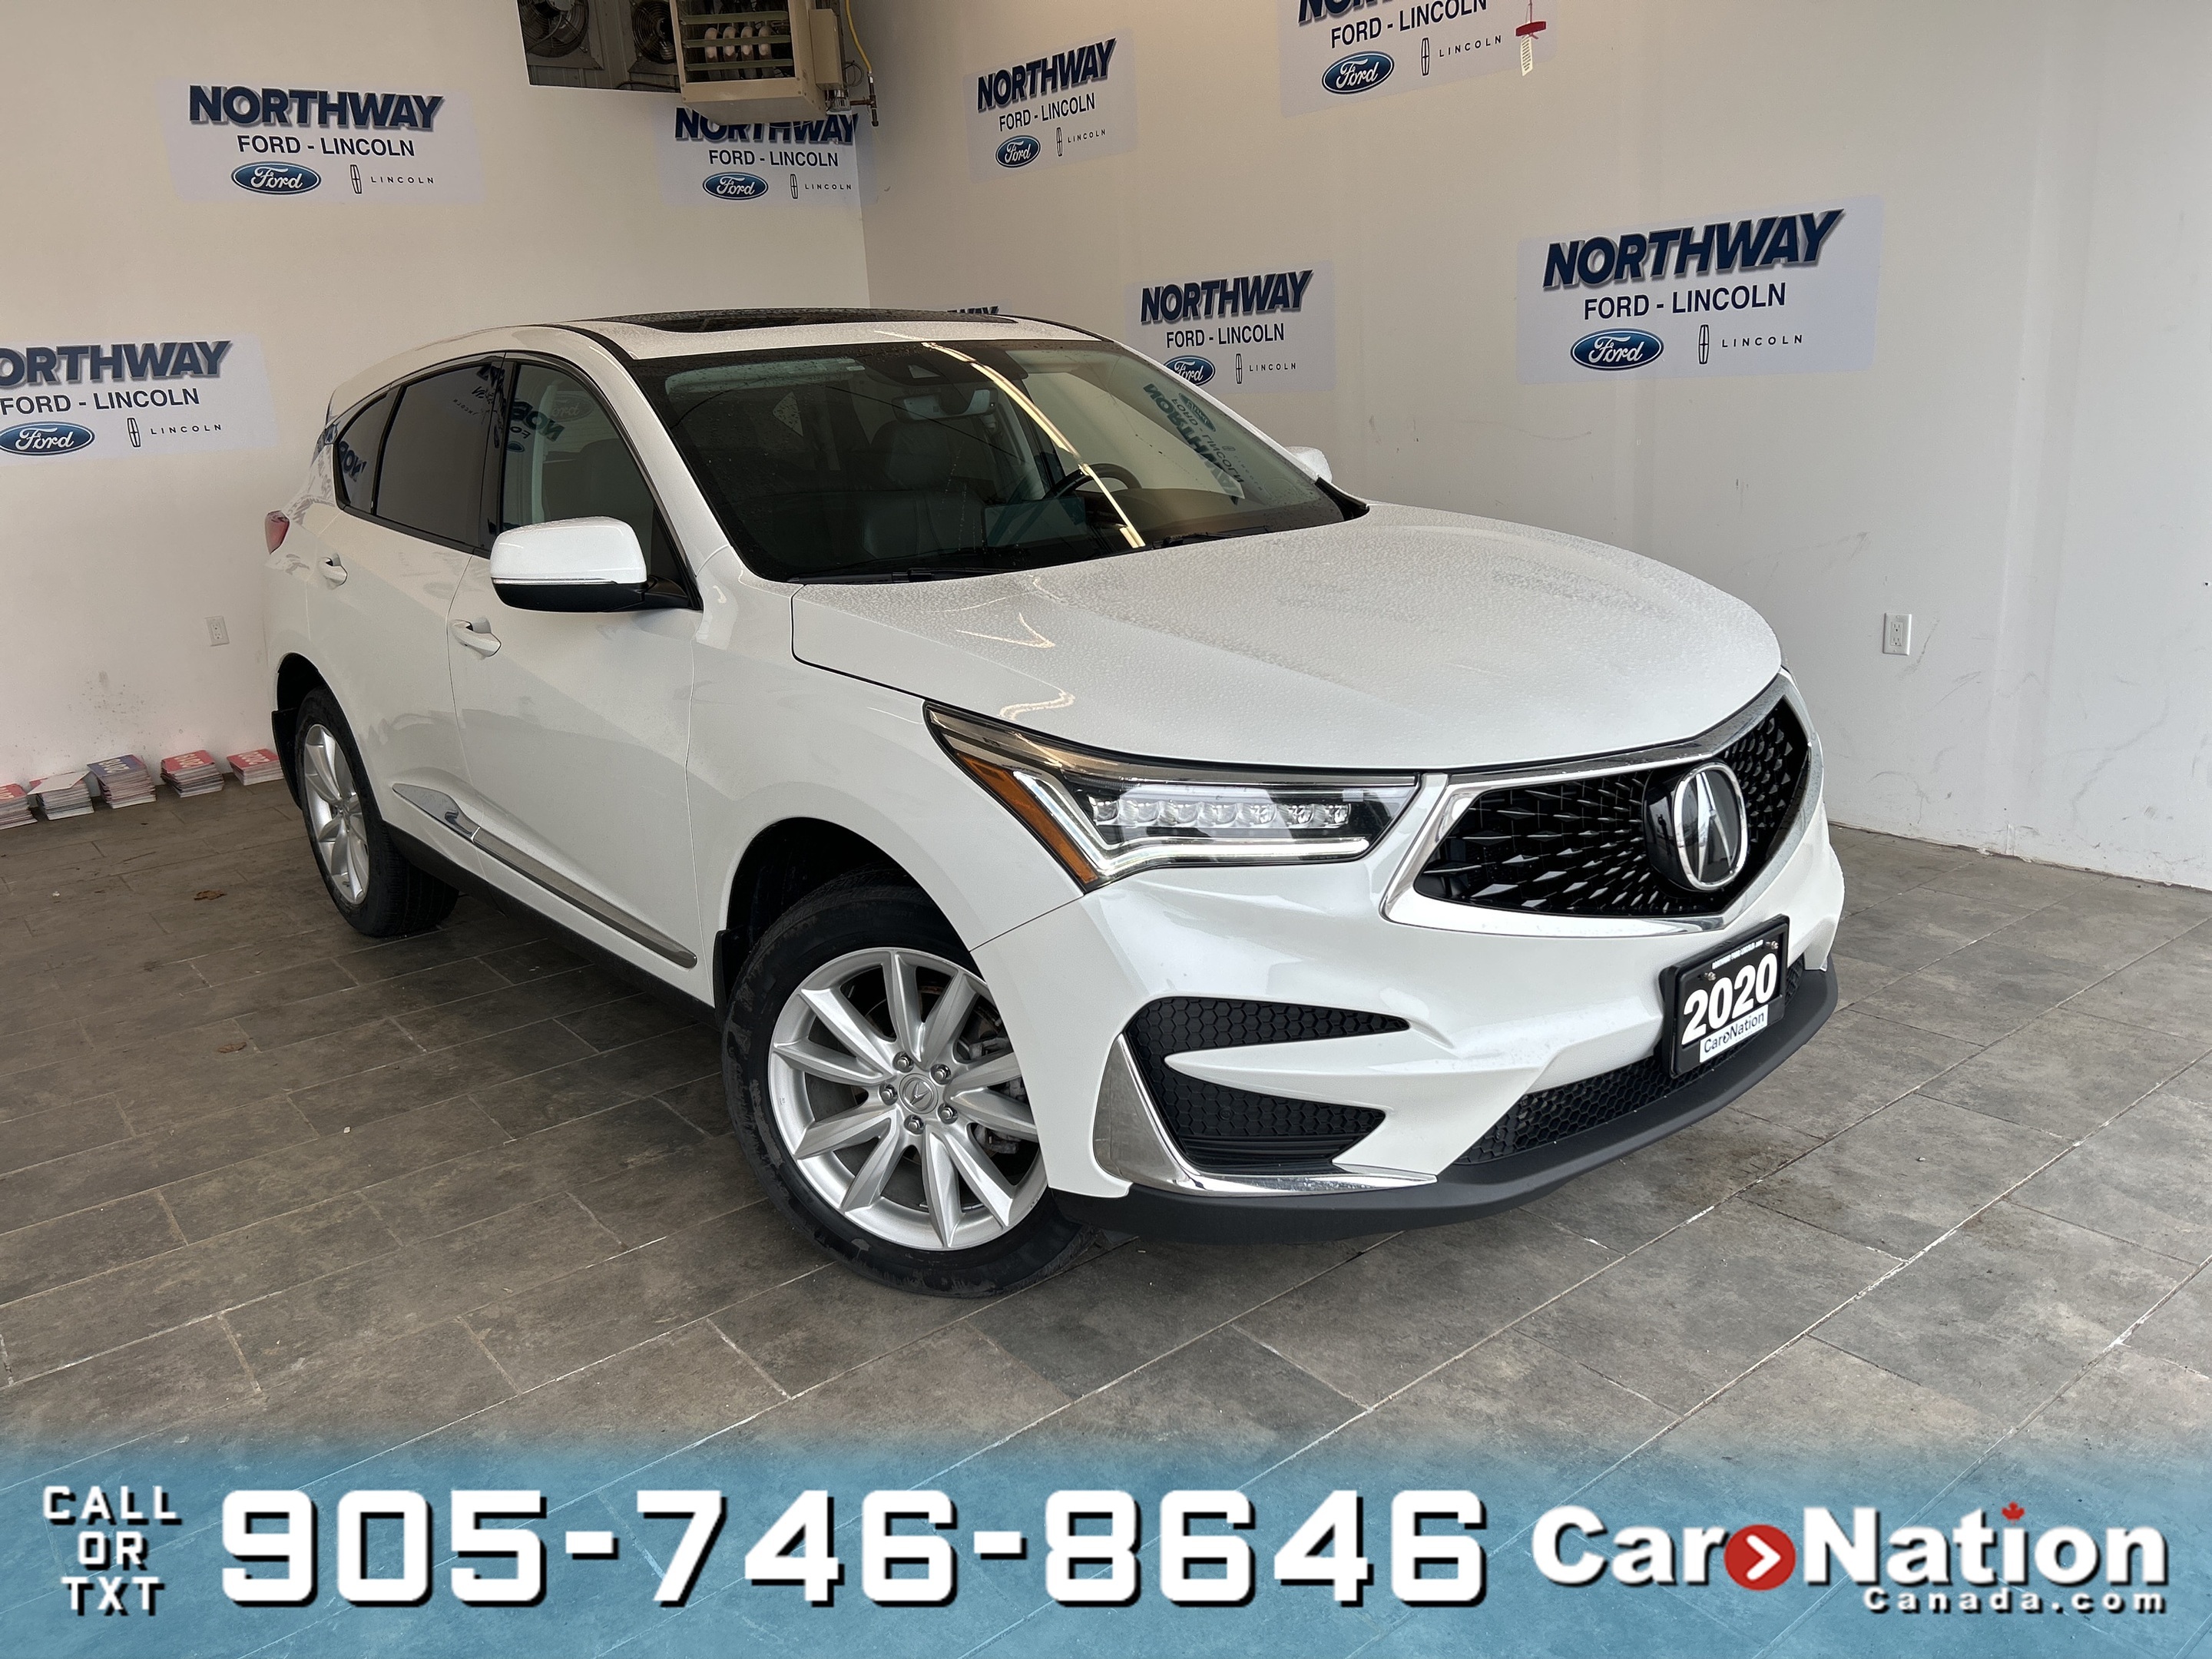 2020 Acura RDX AWD | LEATHER | PANO ROOF | NAVIGATION | ONLY 63KM